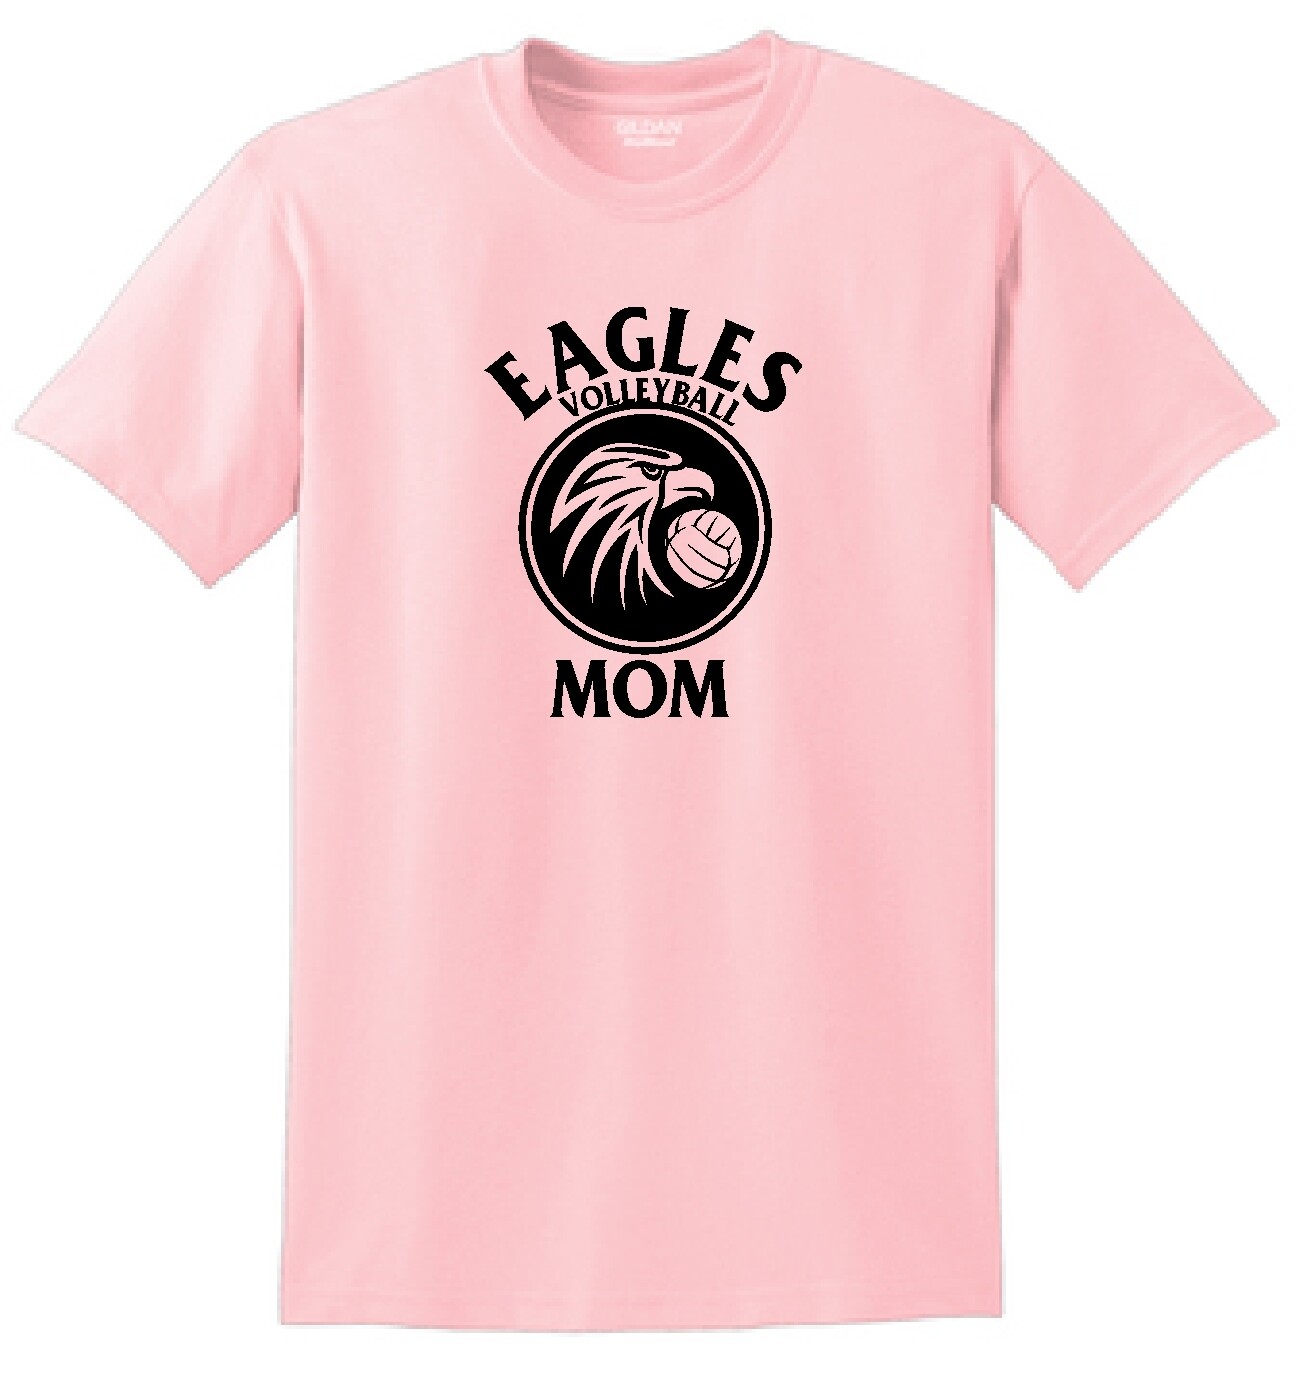 Eagles Volleyball T-Shirt